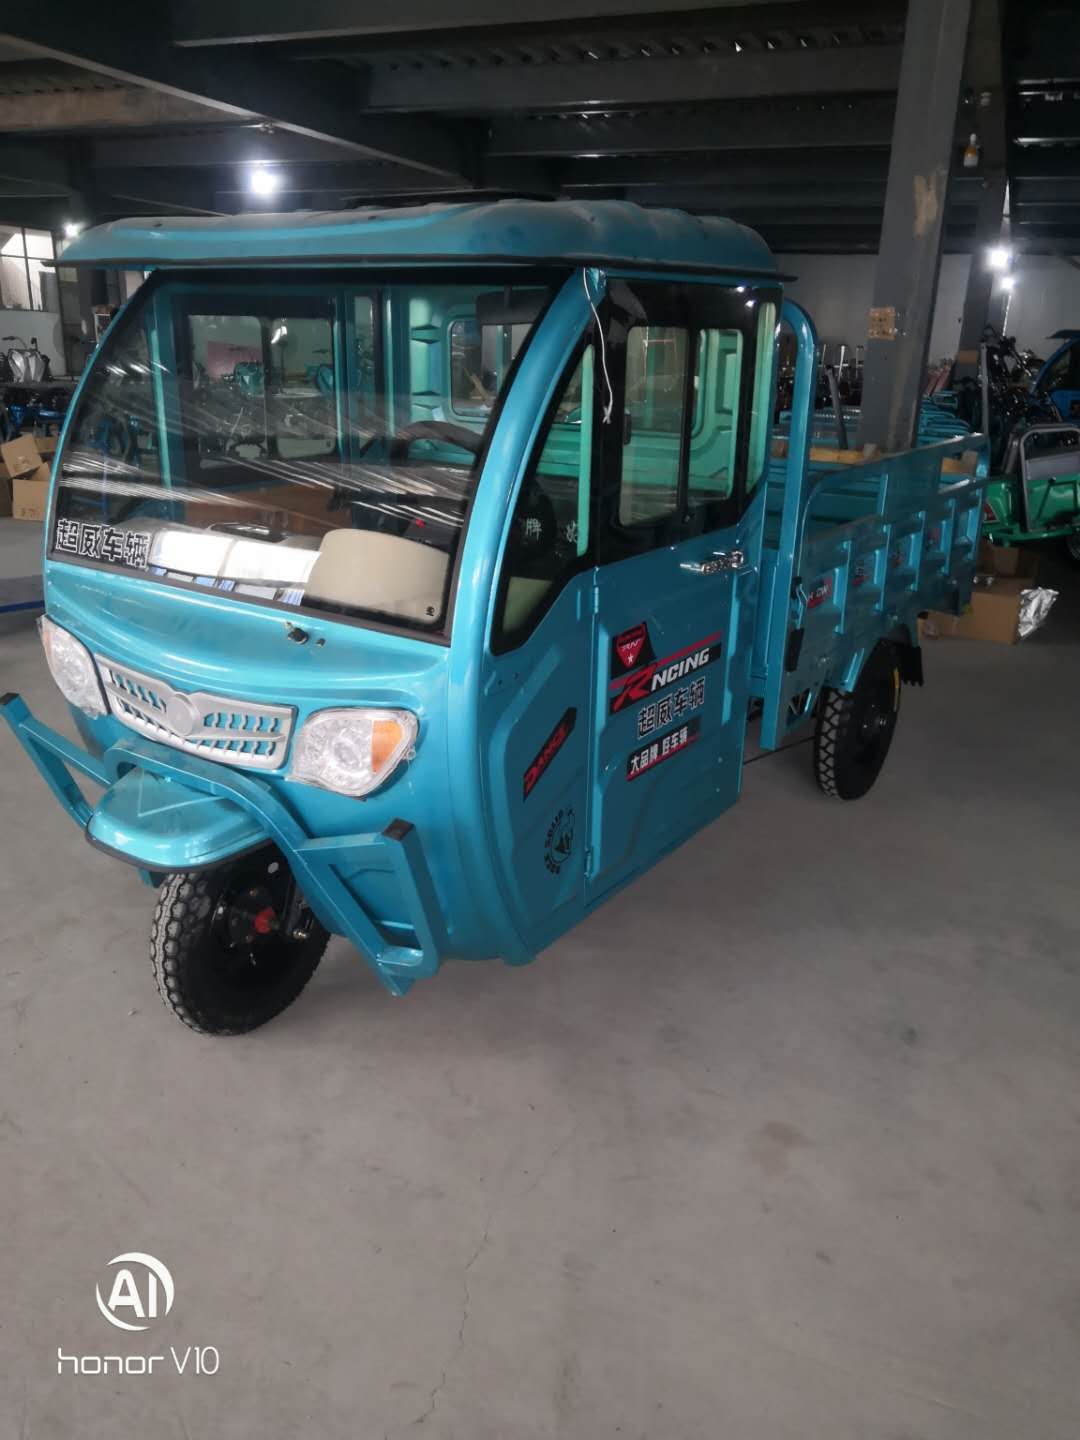 Comprar Family Electric pick up, Family Electric pick up Precios, Family Electric pick up Marcas, Family Electric pick up Fabricante, Family Electric pick up Citas, Family Electric pick up Empresa.